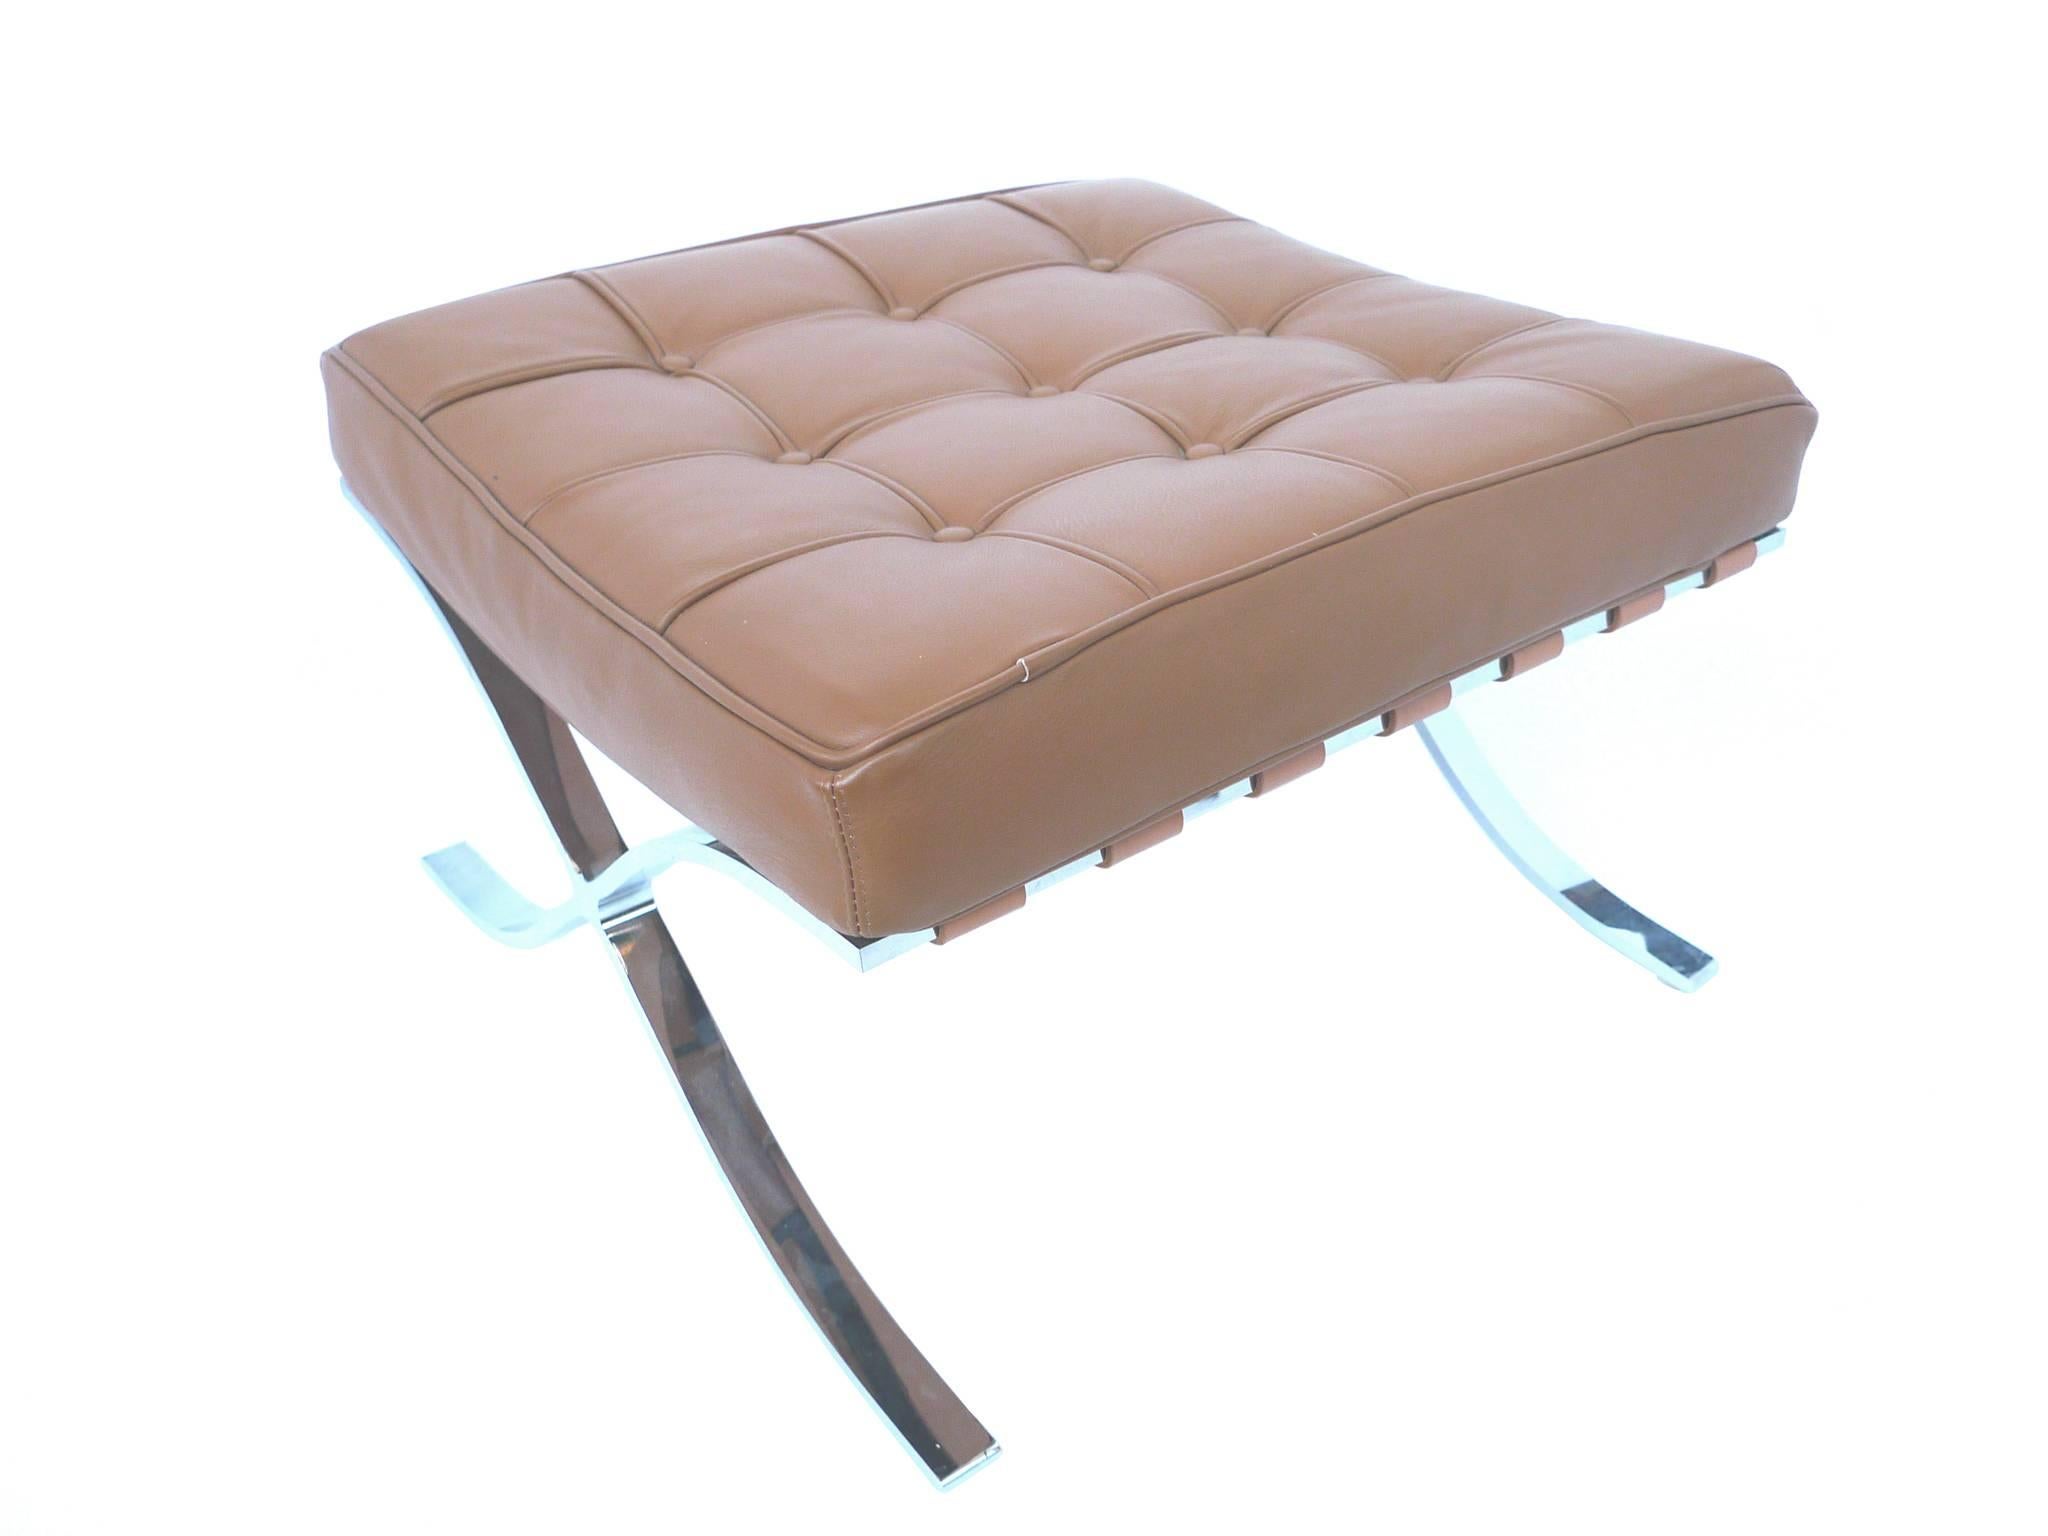 These 1970s leather ottomans are in the style of the Barcelona ottomans designed by Ludwig Mies van der Rohe. They have a tufted cushion and steel X-legs that curve outward. The cushion is secured to the base with leather straps. 

The leather is